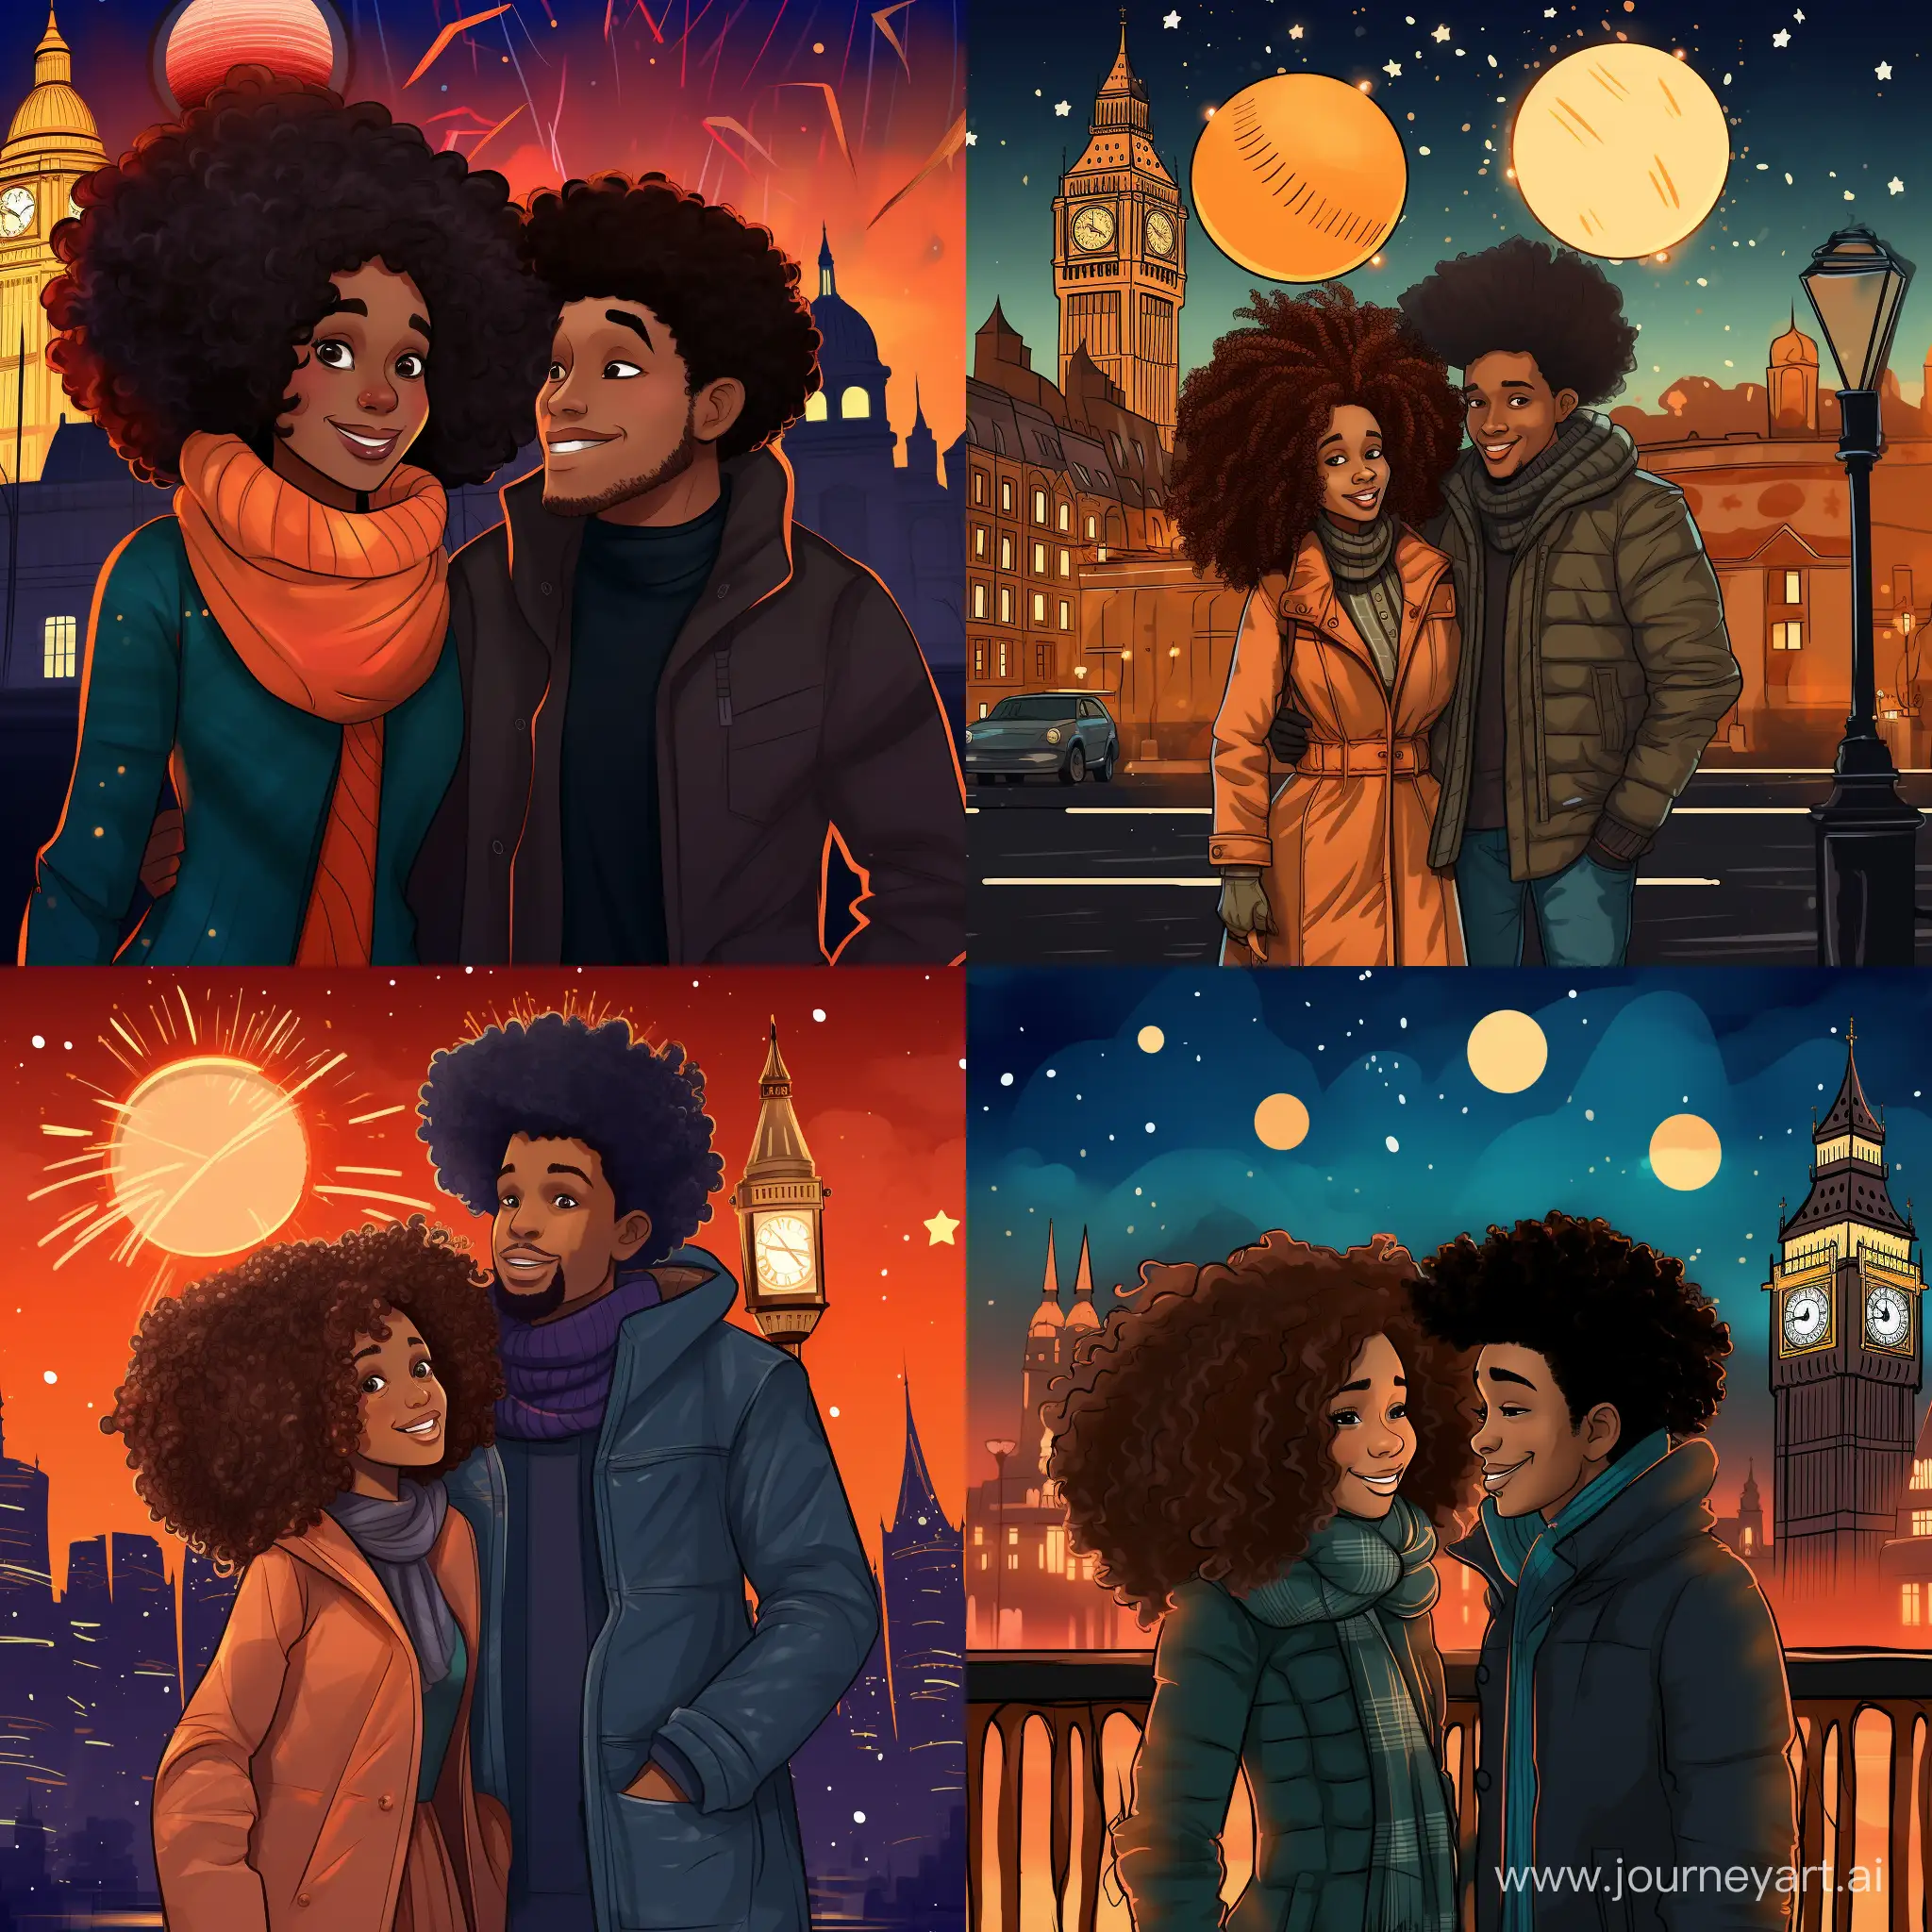 Colourful cartoon style of Black men and women with afros and dreadlocks standing in front of Big Ben at night celebrating the new year